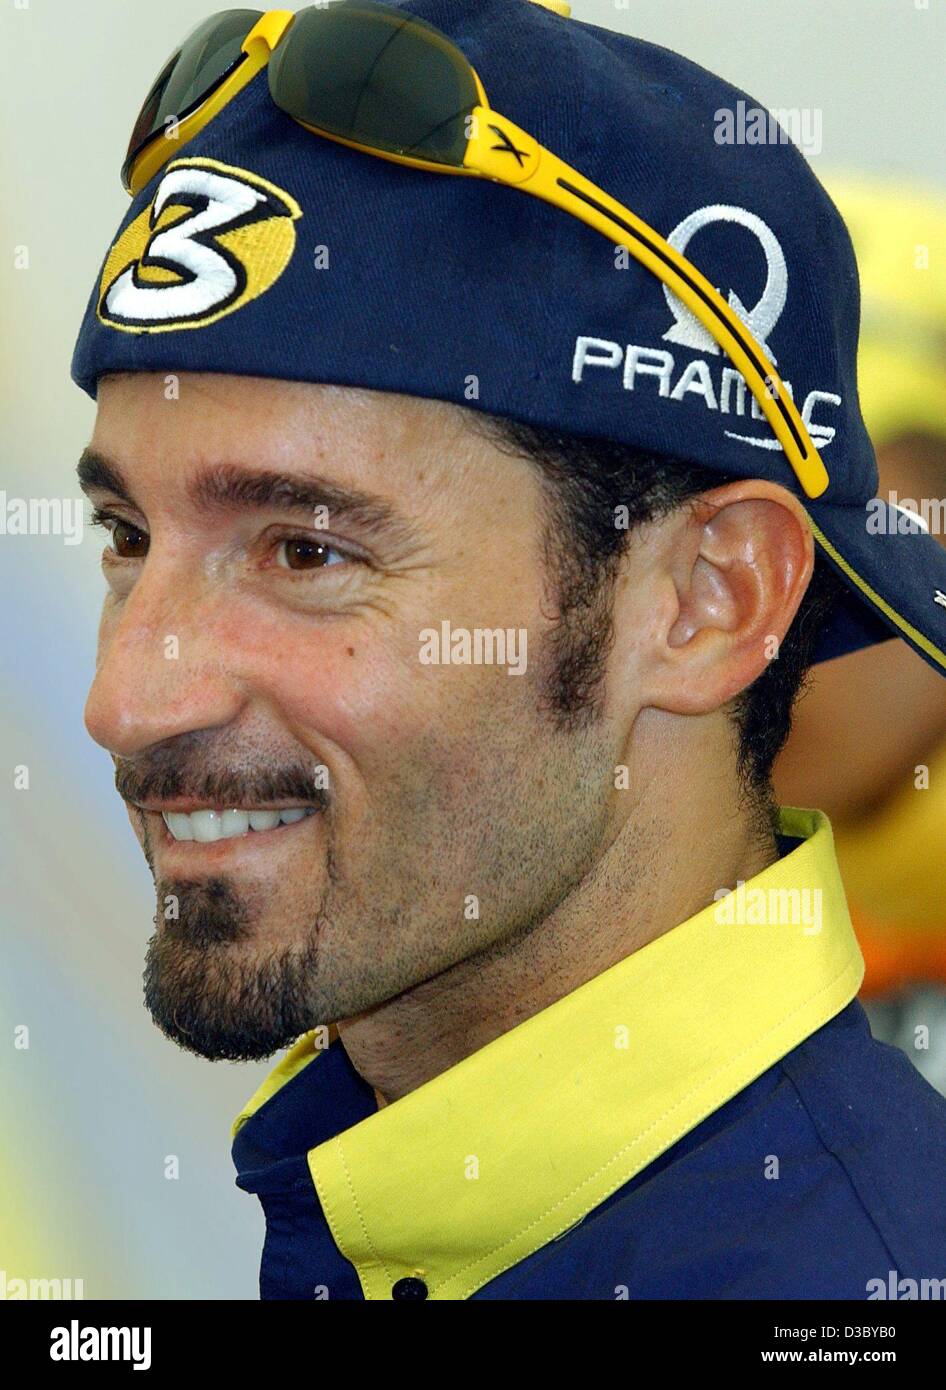 (dpa) - Italian motorcycling race driver Max Biaggi, pictured during the motorcycling Grand Prix on the Sachsenring near Hohenstein-Ernstthal, Germany, 27 July 2003. Biaggi drives in the MotoGP class. Stock Photo